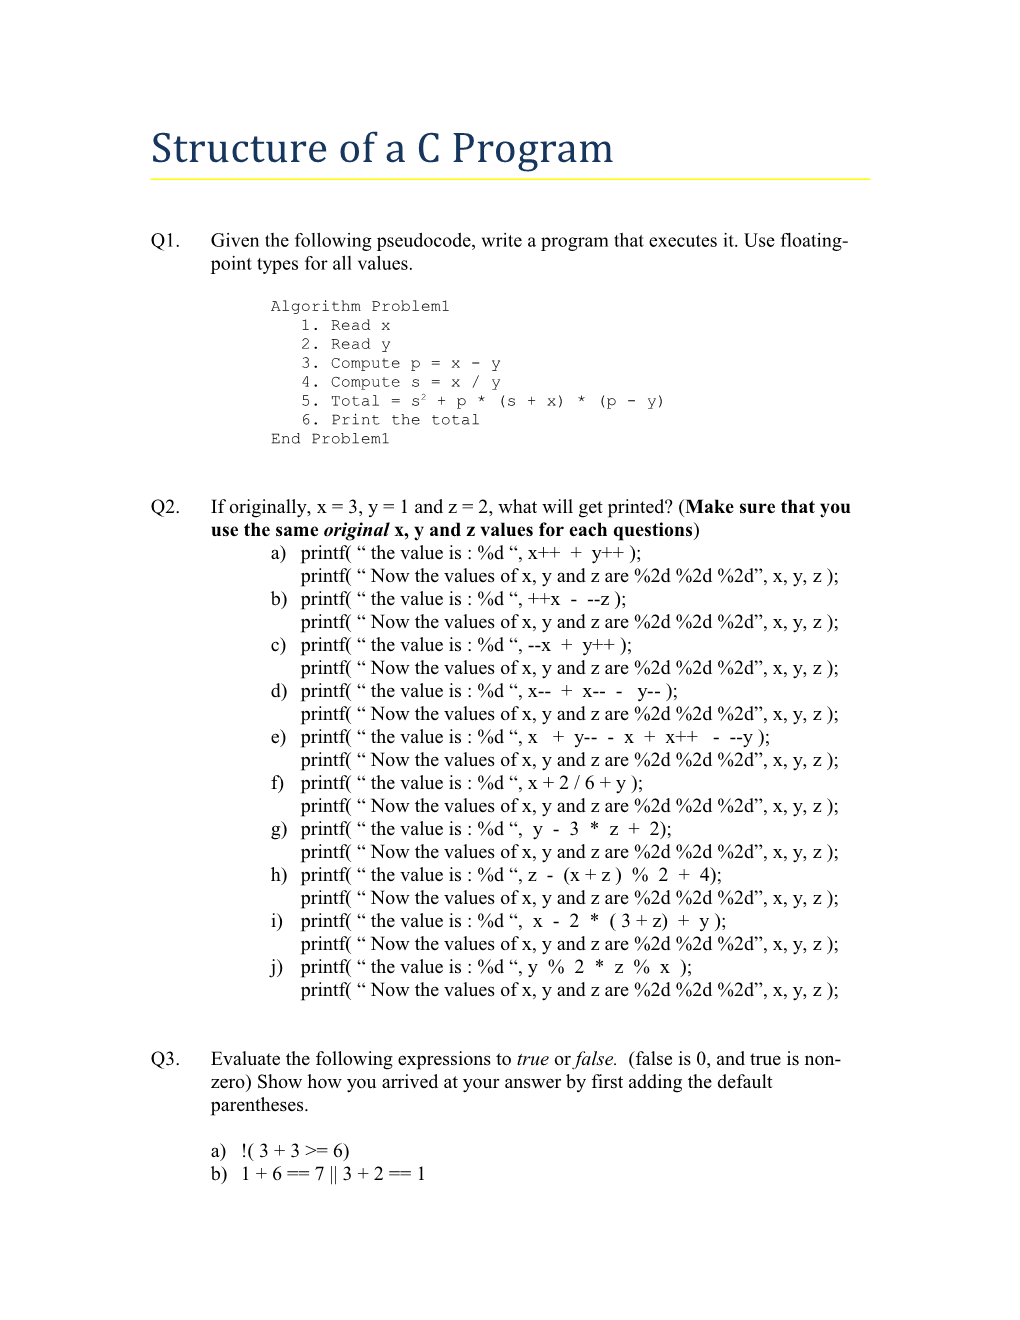 Structure of a C Program